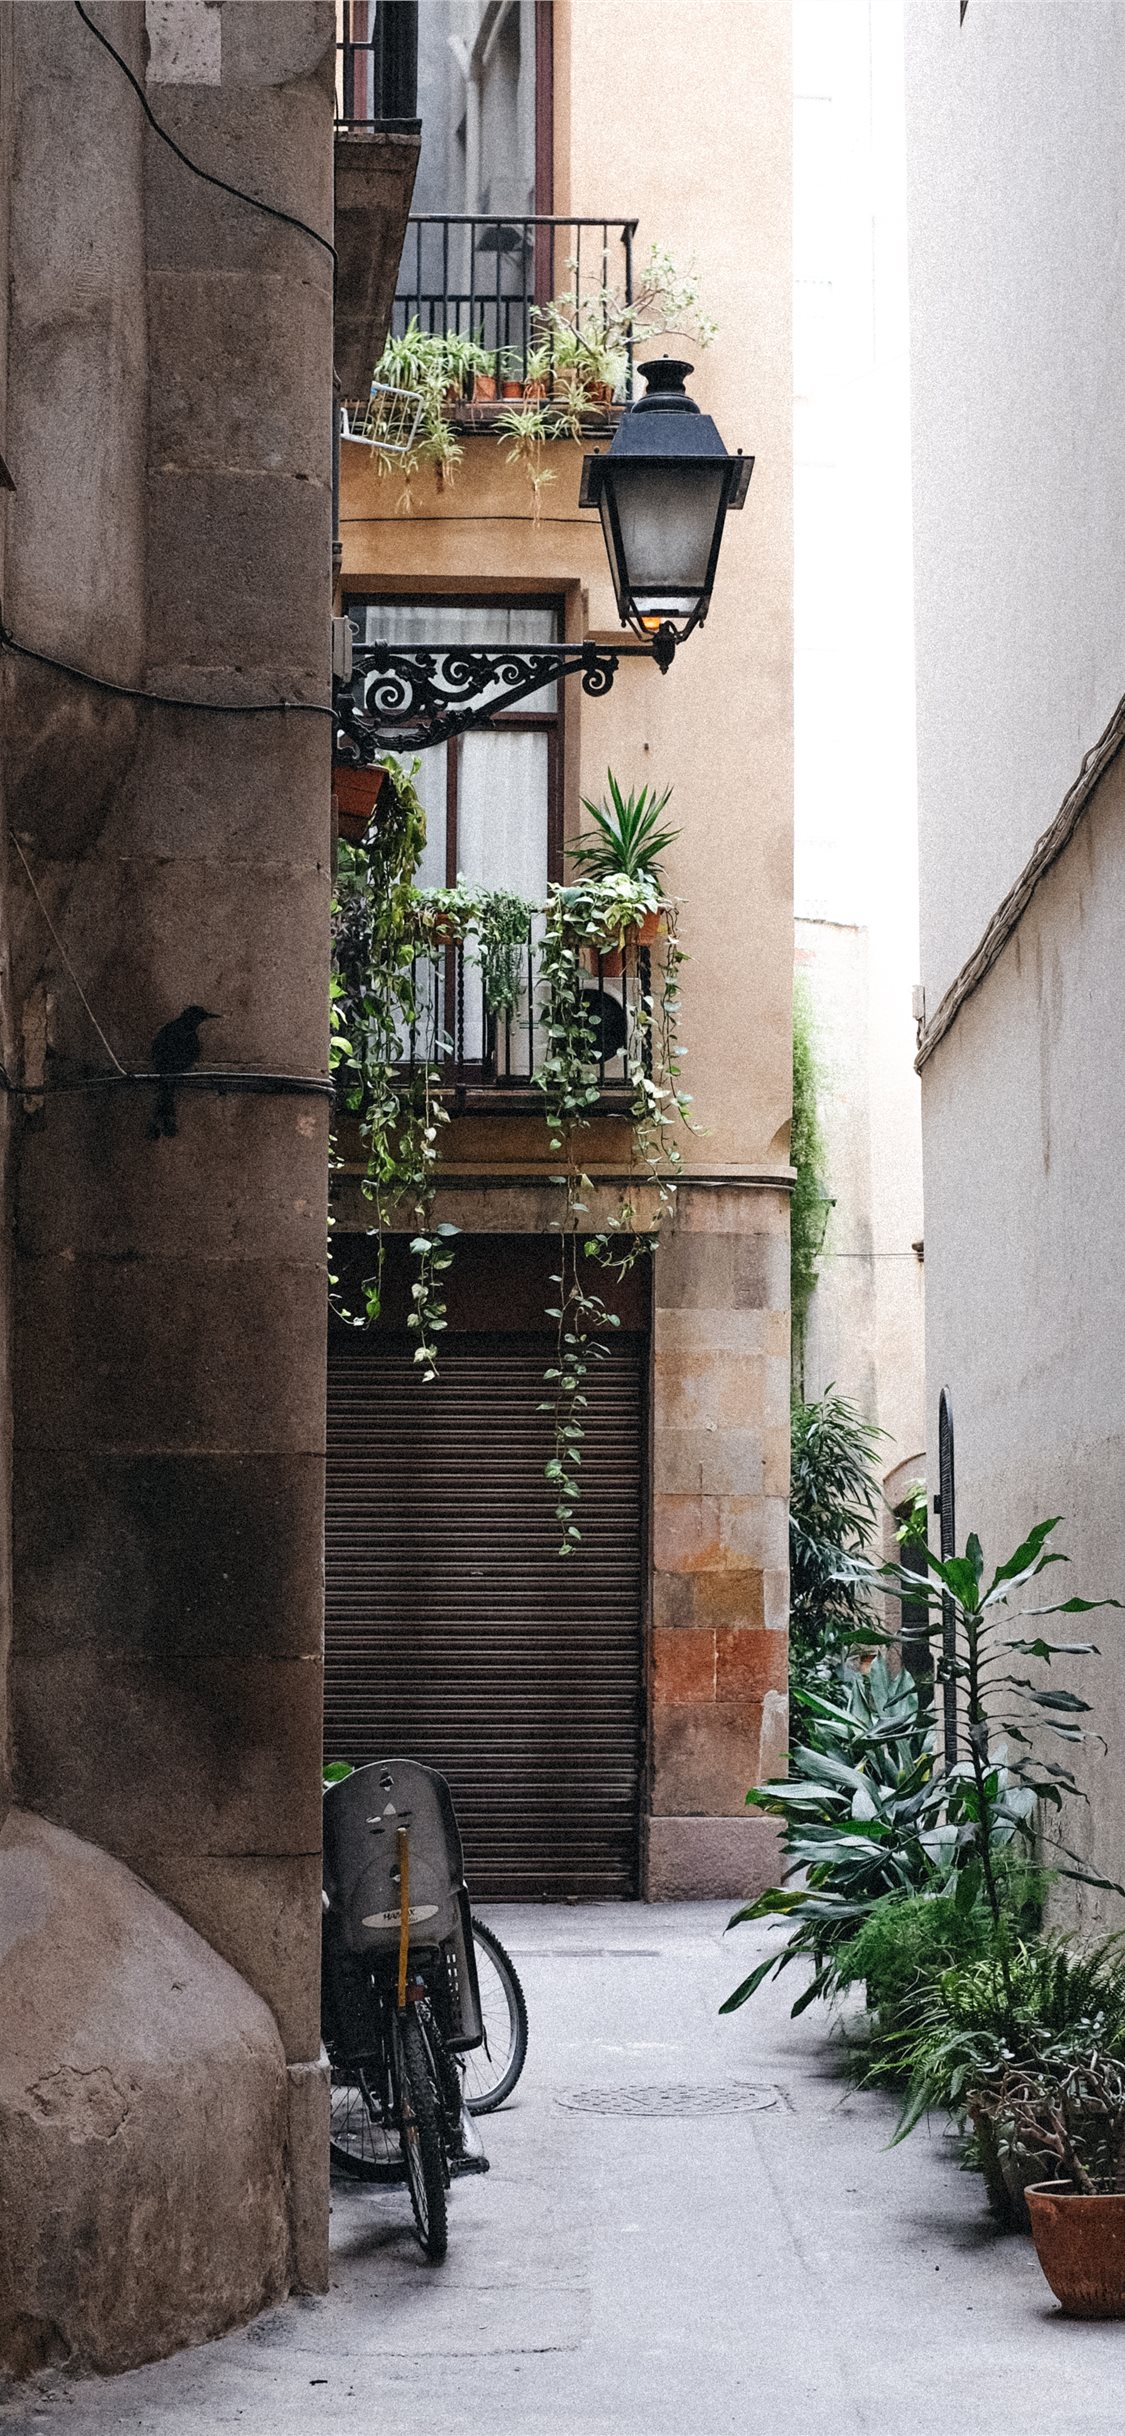 barcelona wallpaper,property,wall,building,architecture,house